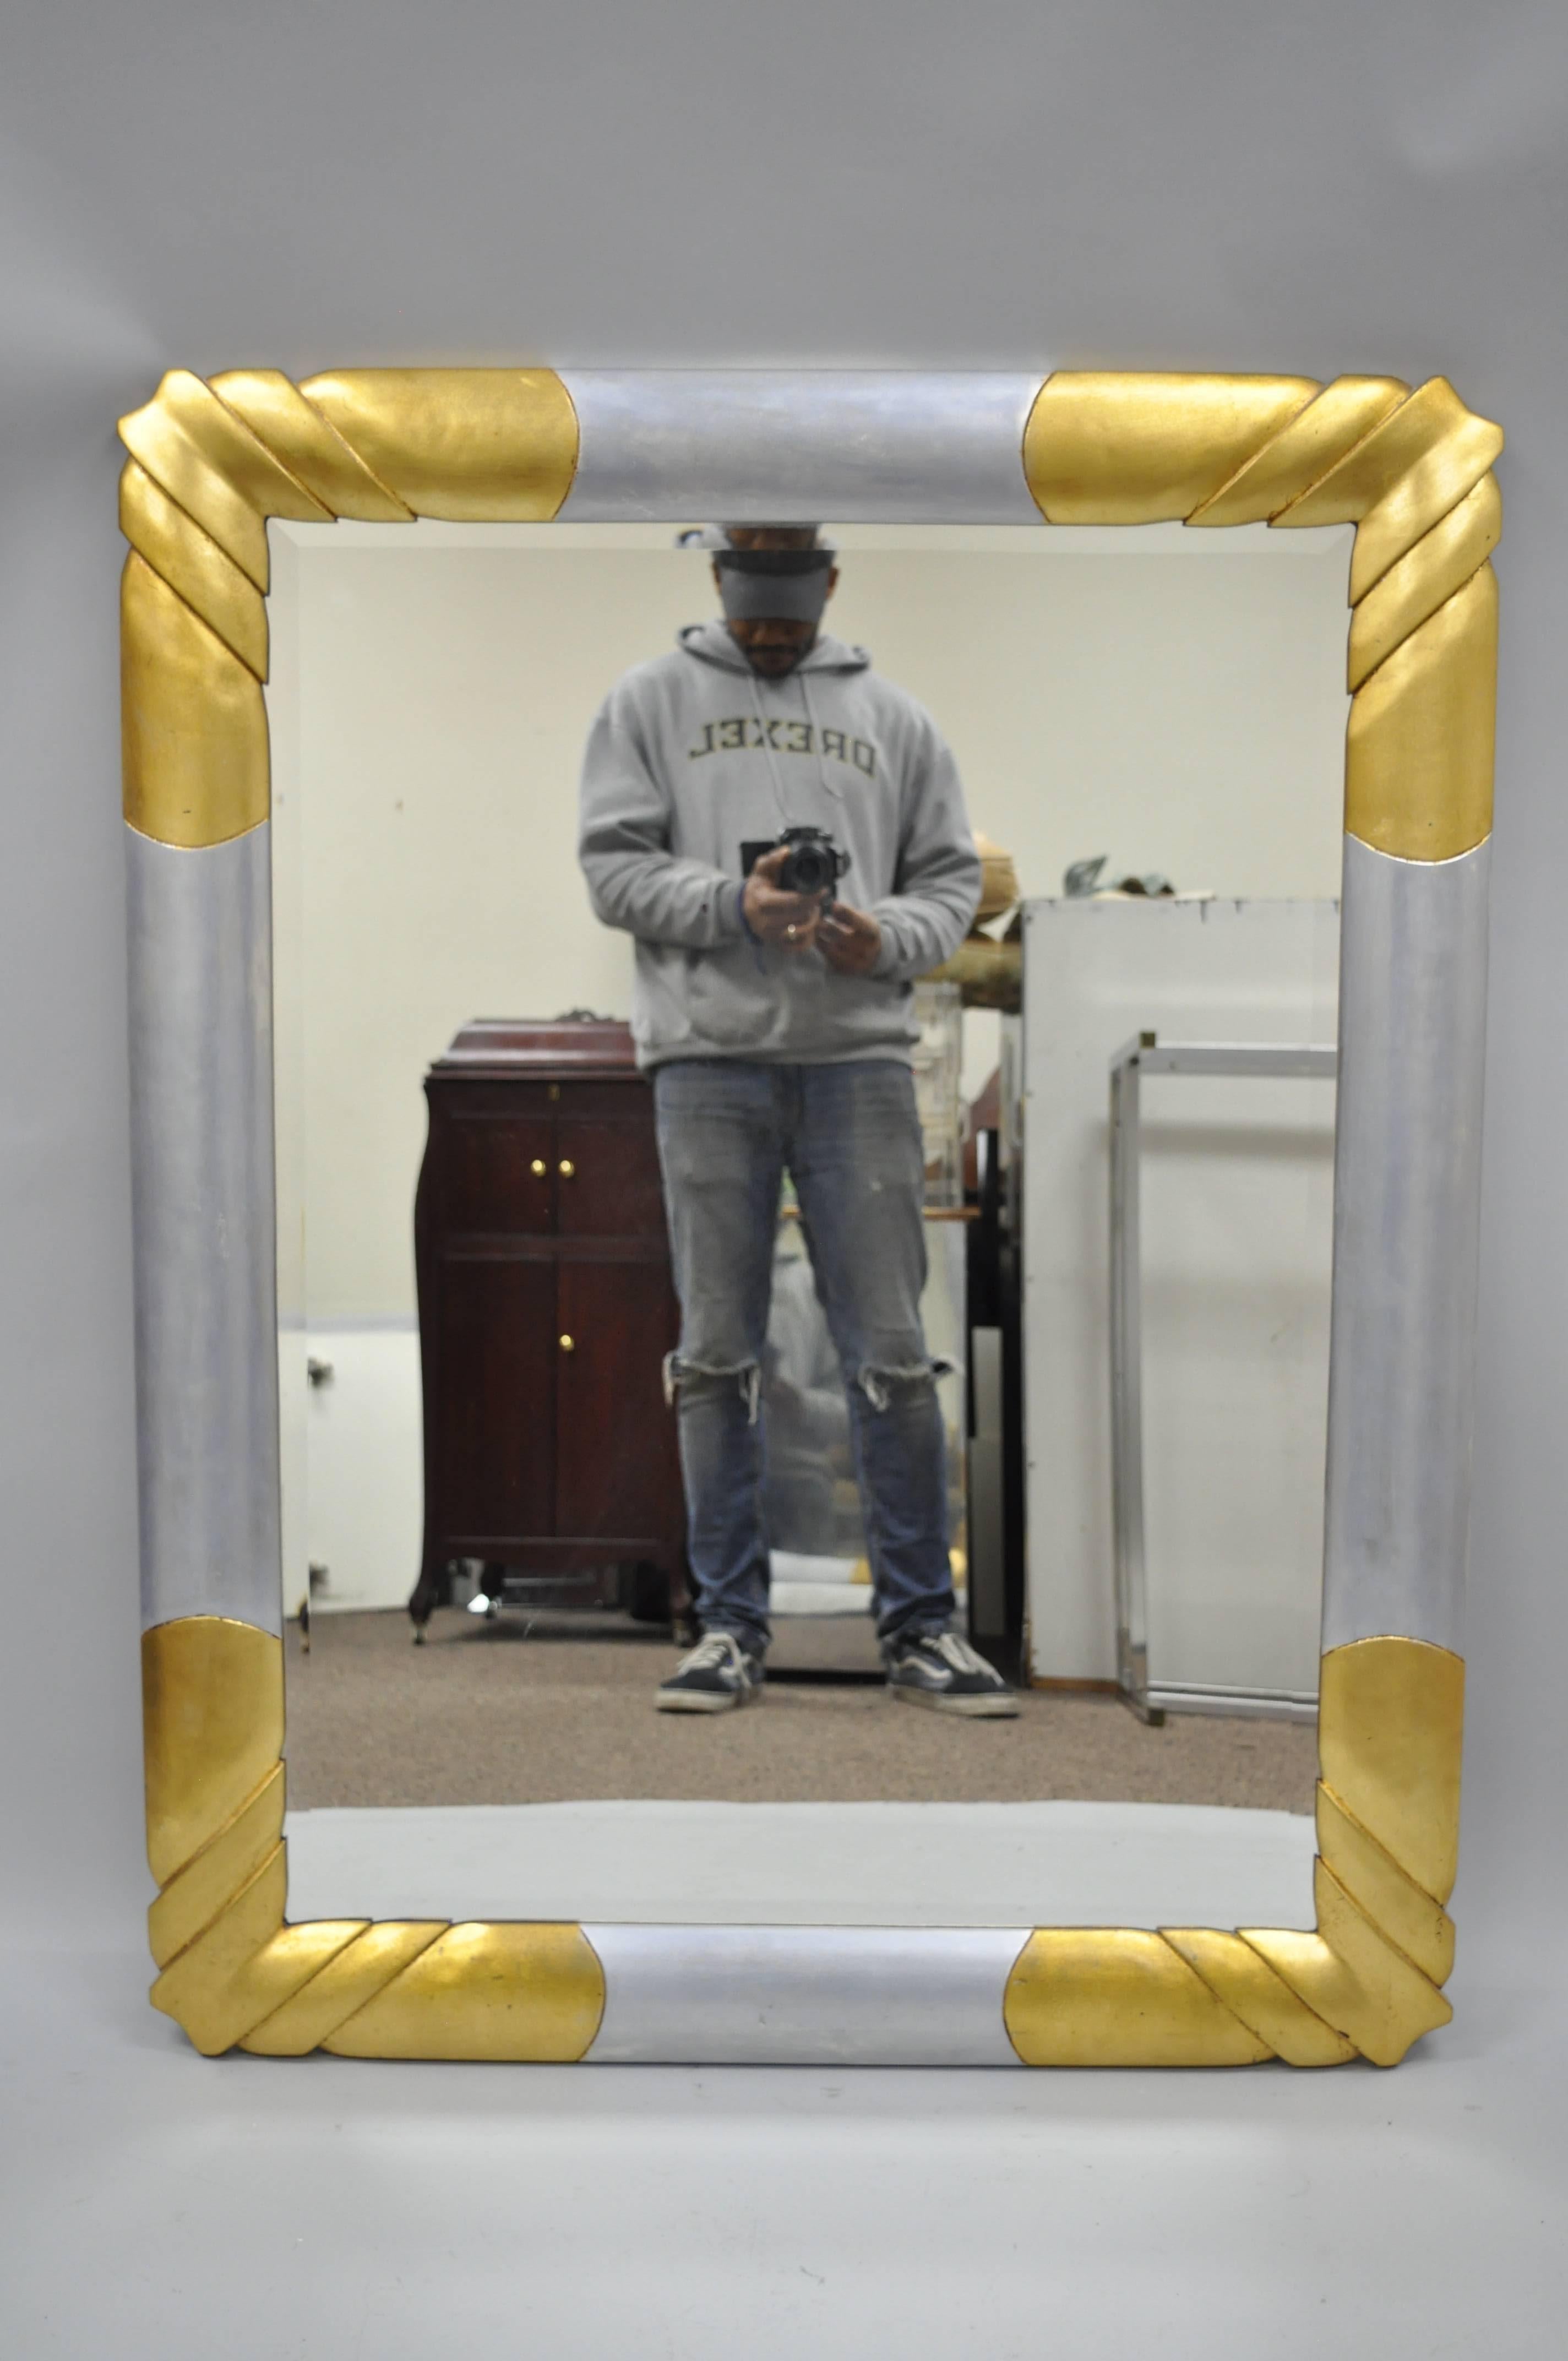 Vintage gold and silver leaf Hollywood Regency / Art Deco style wall mirror by Turner. Item features a gold and silver leaf finish, bevelled glass, molded foam frame, impressive stylish form, original label to rear. Can be hung vertical or